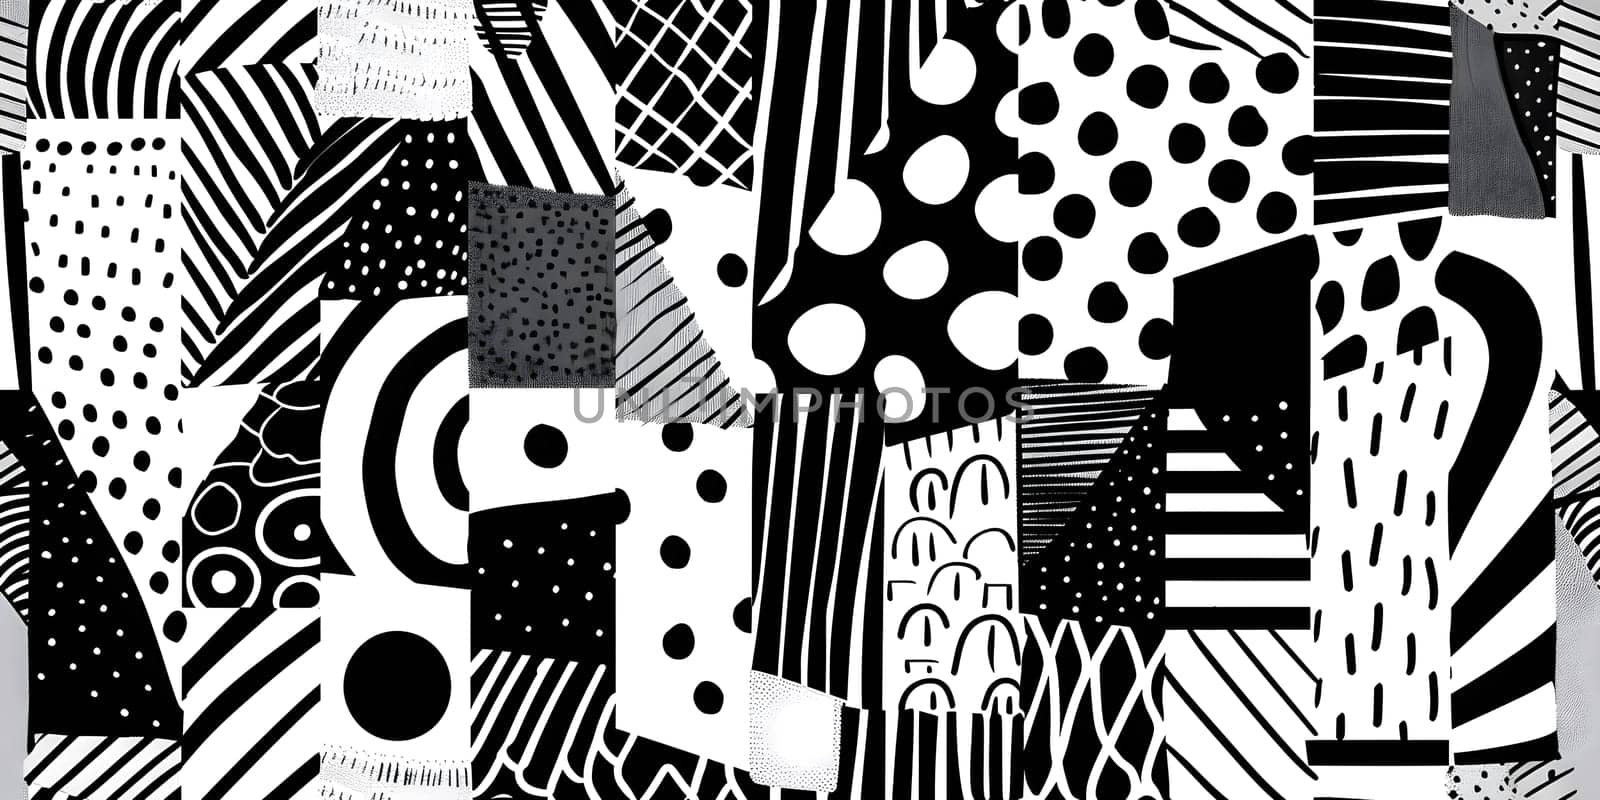 The blackandwhite pattern displays a variety of intricate designs resembling urban architecture. It is reminiscent of a mammals sleek fur pattern in an artistic style